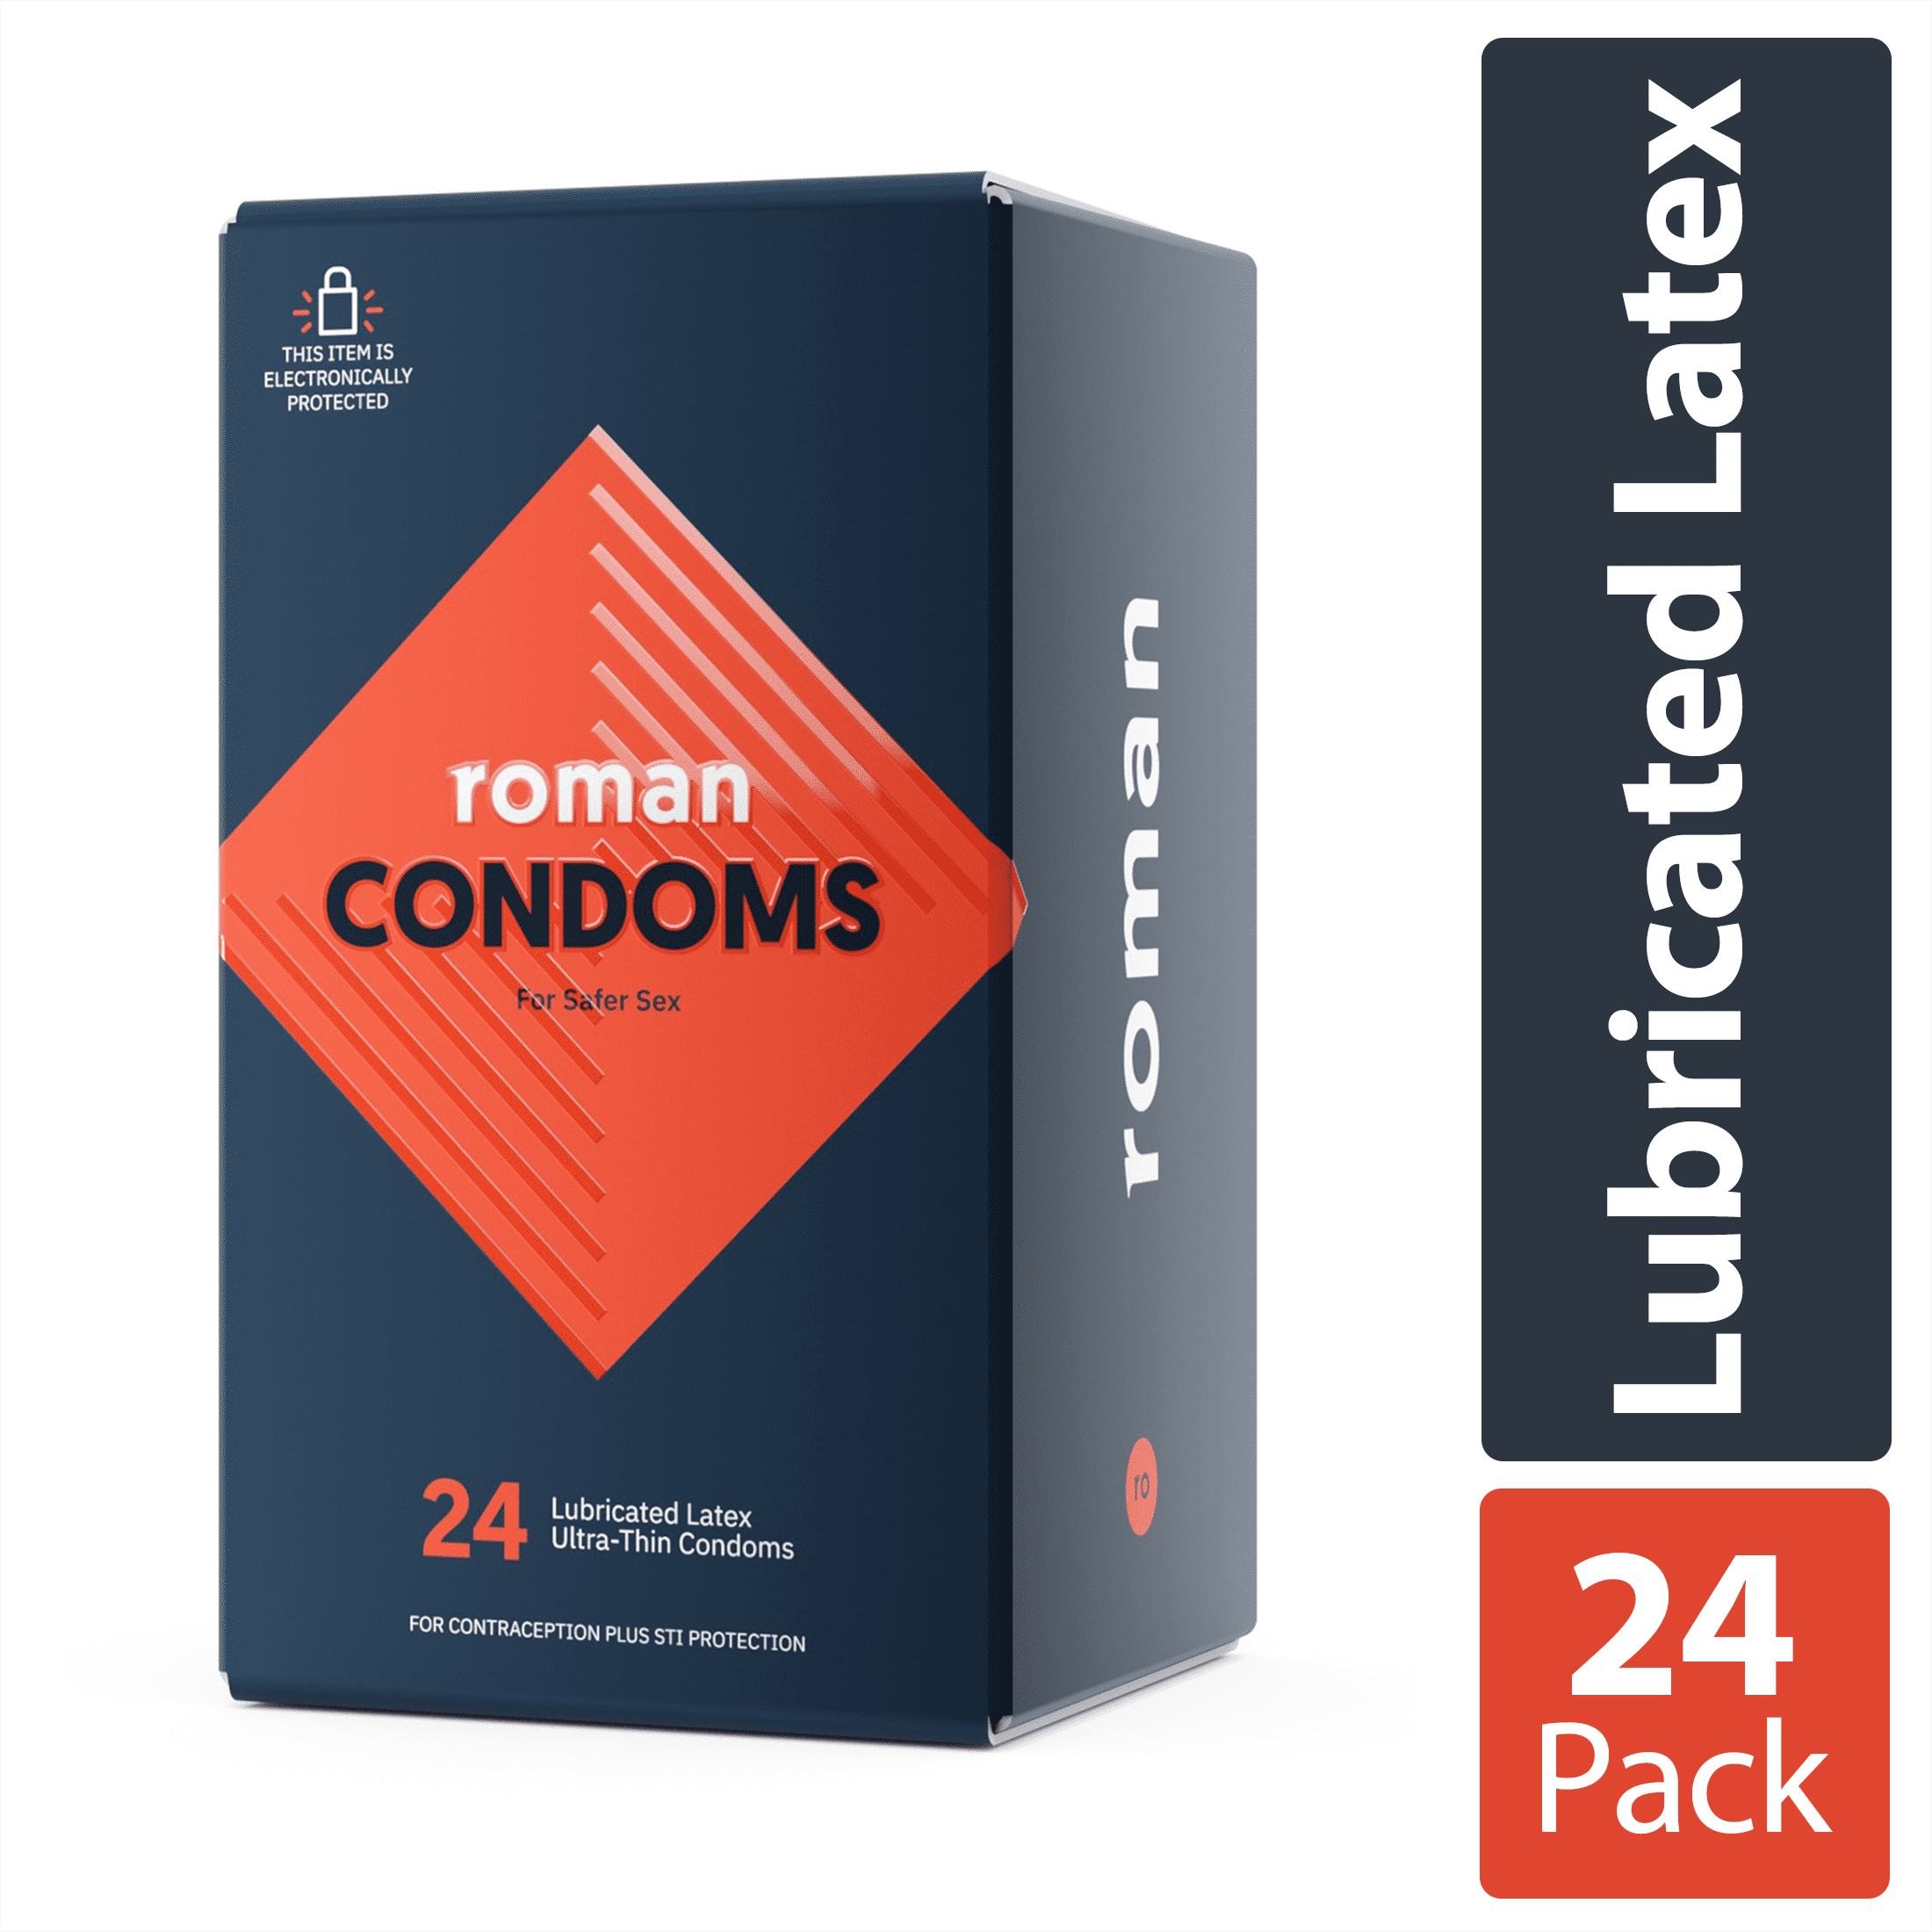 Roman Ultra Thin Condoms, 100% Natural Latex Lubricated Condoms, FSA/HSA Eligible, 24 Pack